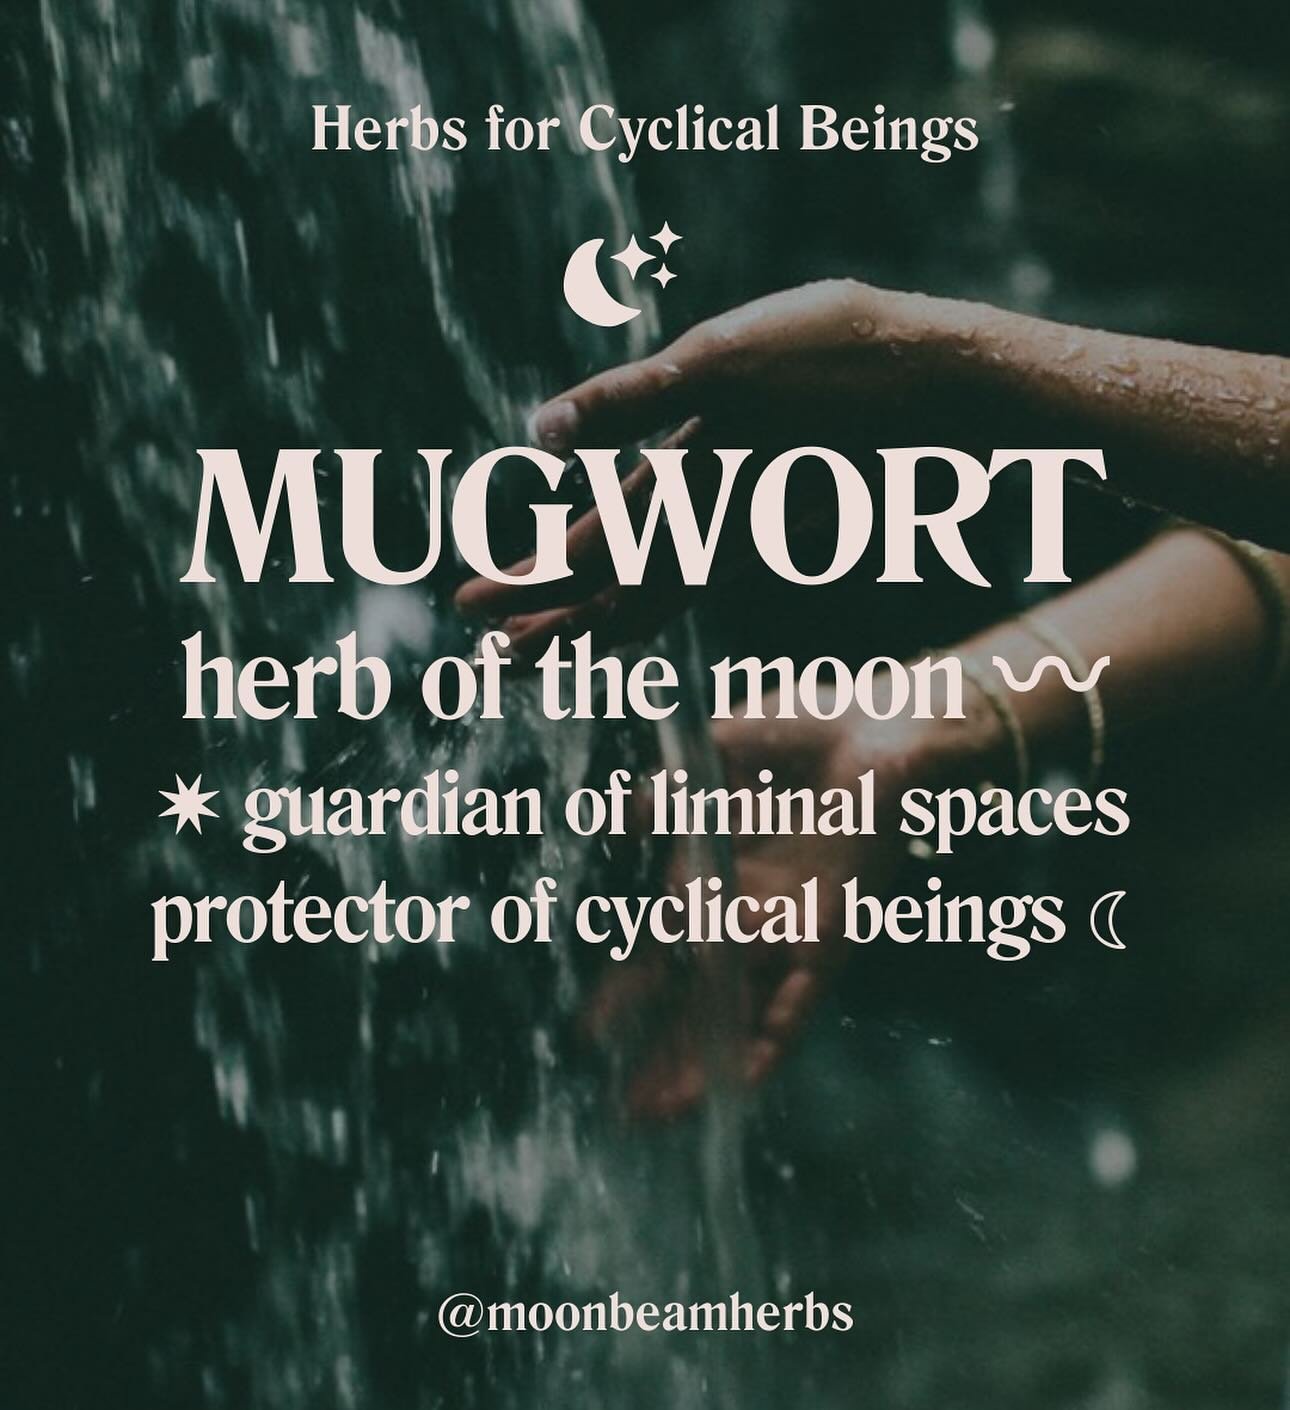 Mugwort ꩜✦

Mugwort, with her silvery leaves and lunar magic, is adept at transversing the subconscious and unconscious realms, bringing shadows into light, pulling up deep wisdom, helping us dream wild dreams&hellip;
&nbsp;
Mugwort is one of my dear